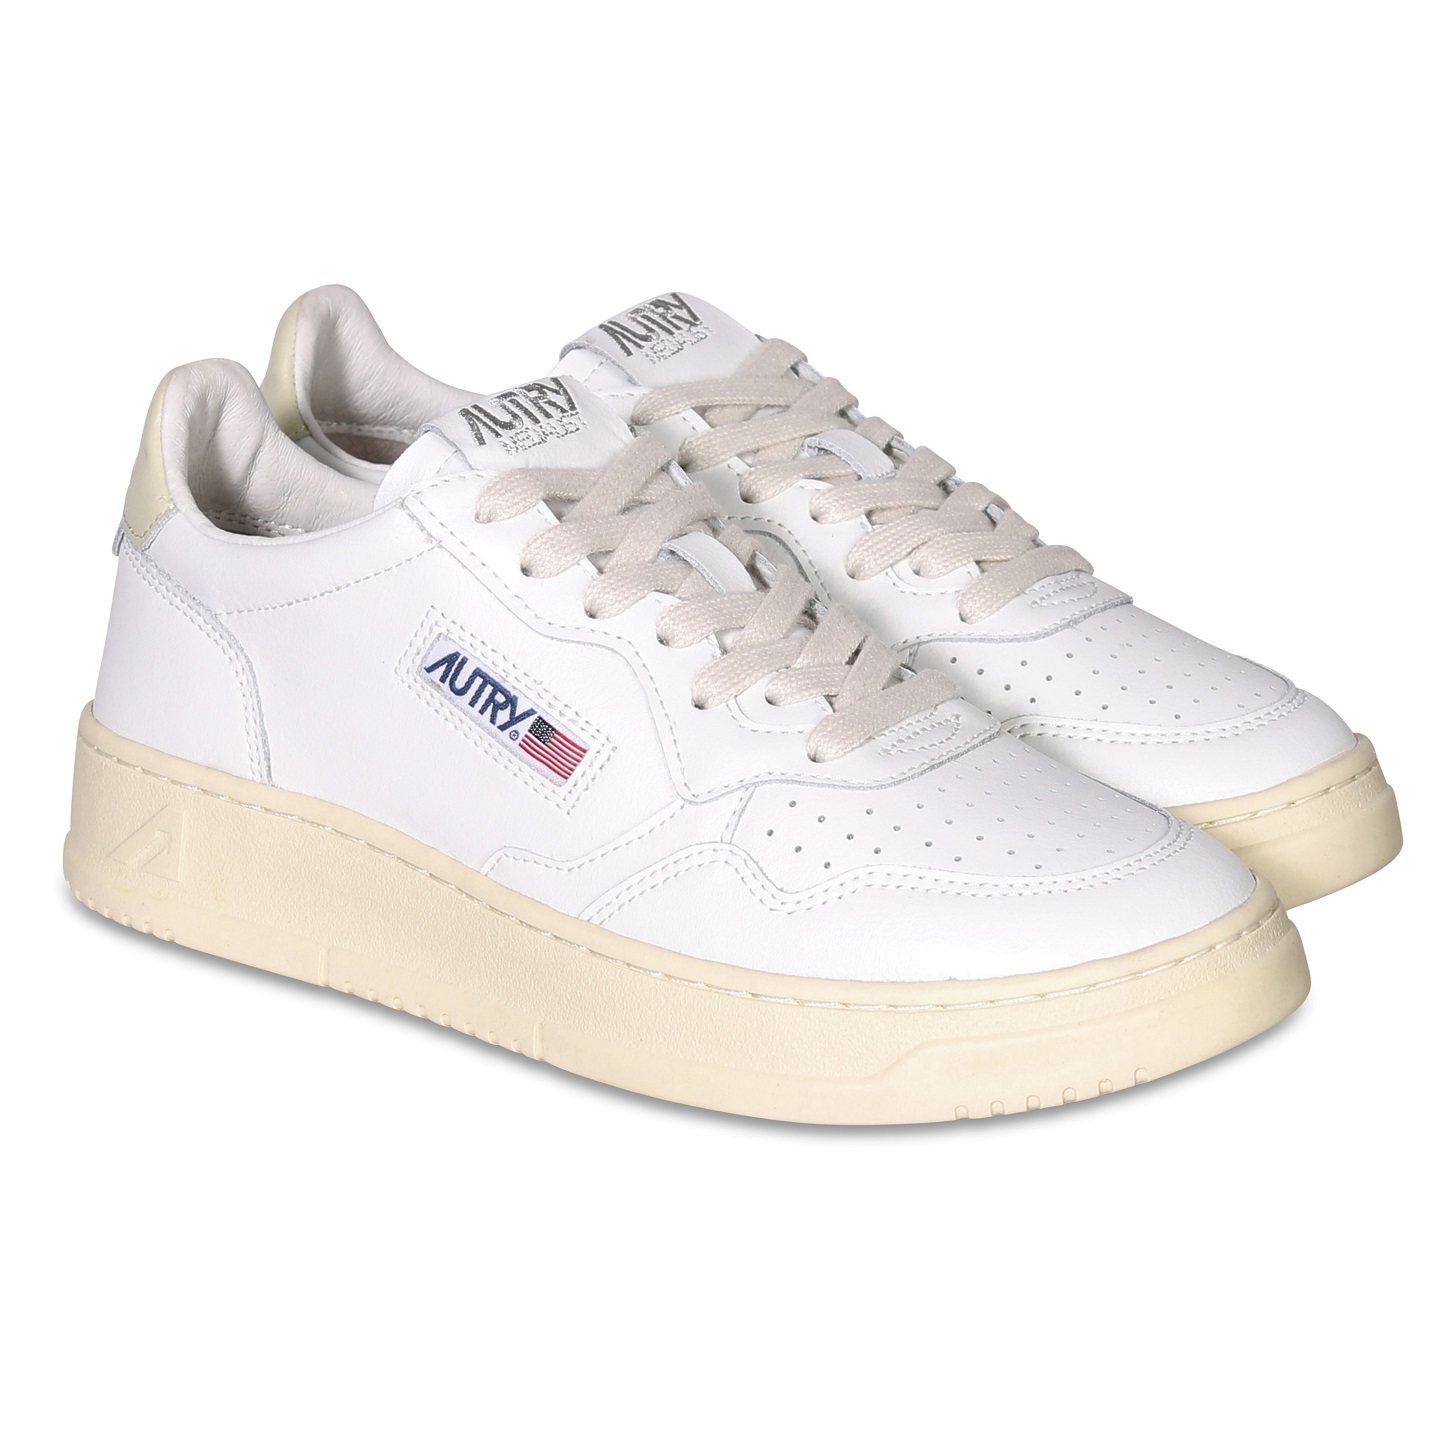 AUTRY ACTION SHOES Sneaker Low in White/Beige 35